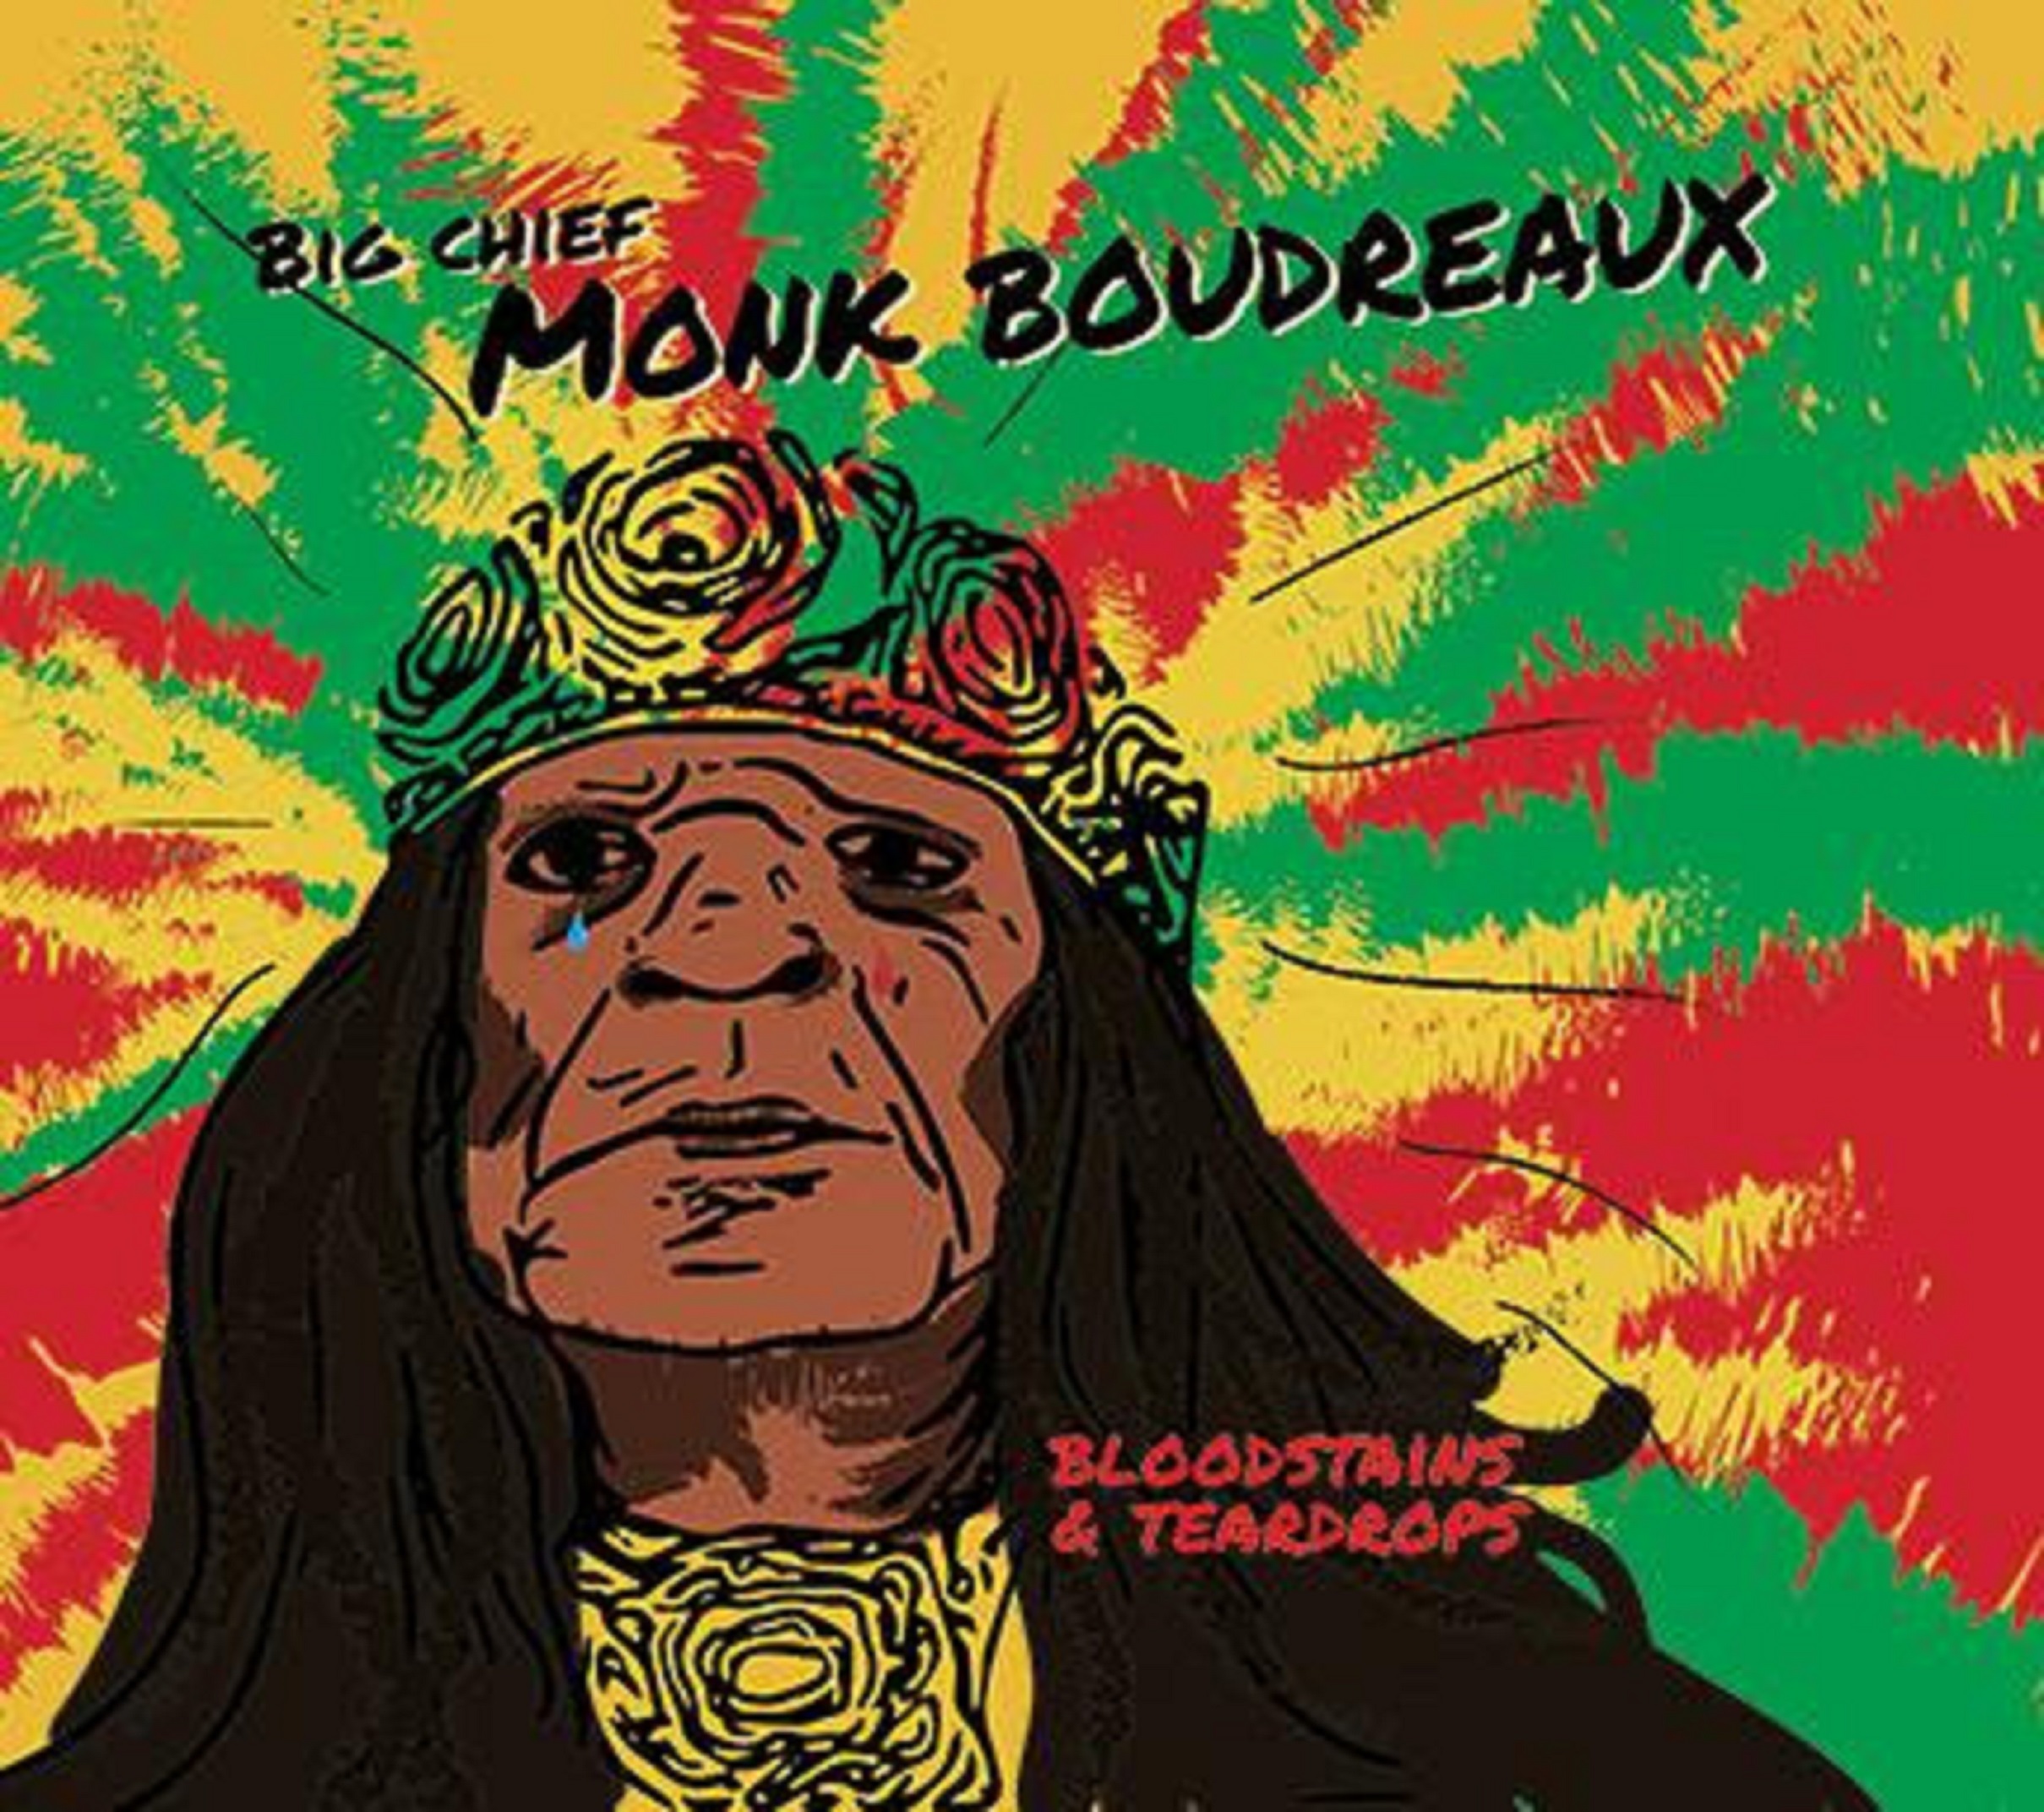 Big Chief Monk Boudreaux Grammy Nominated for Regional Roots Album 